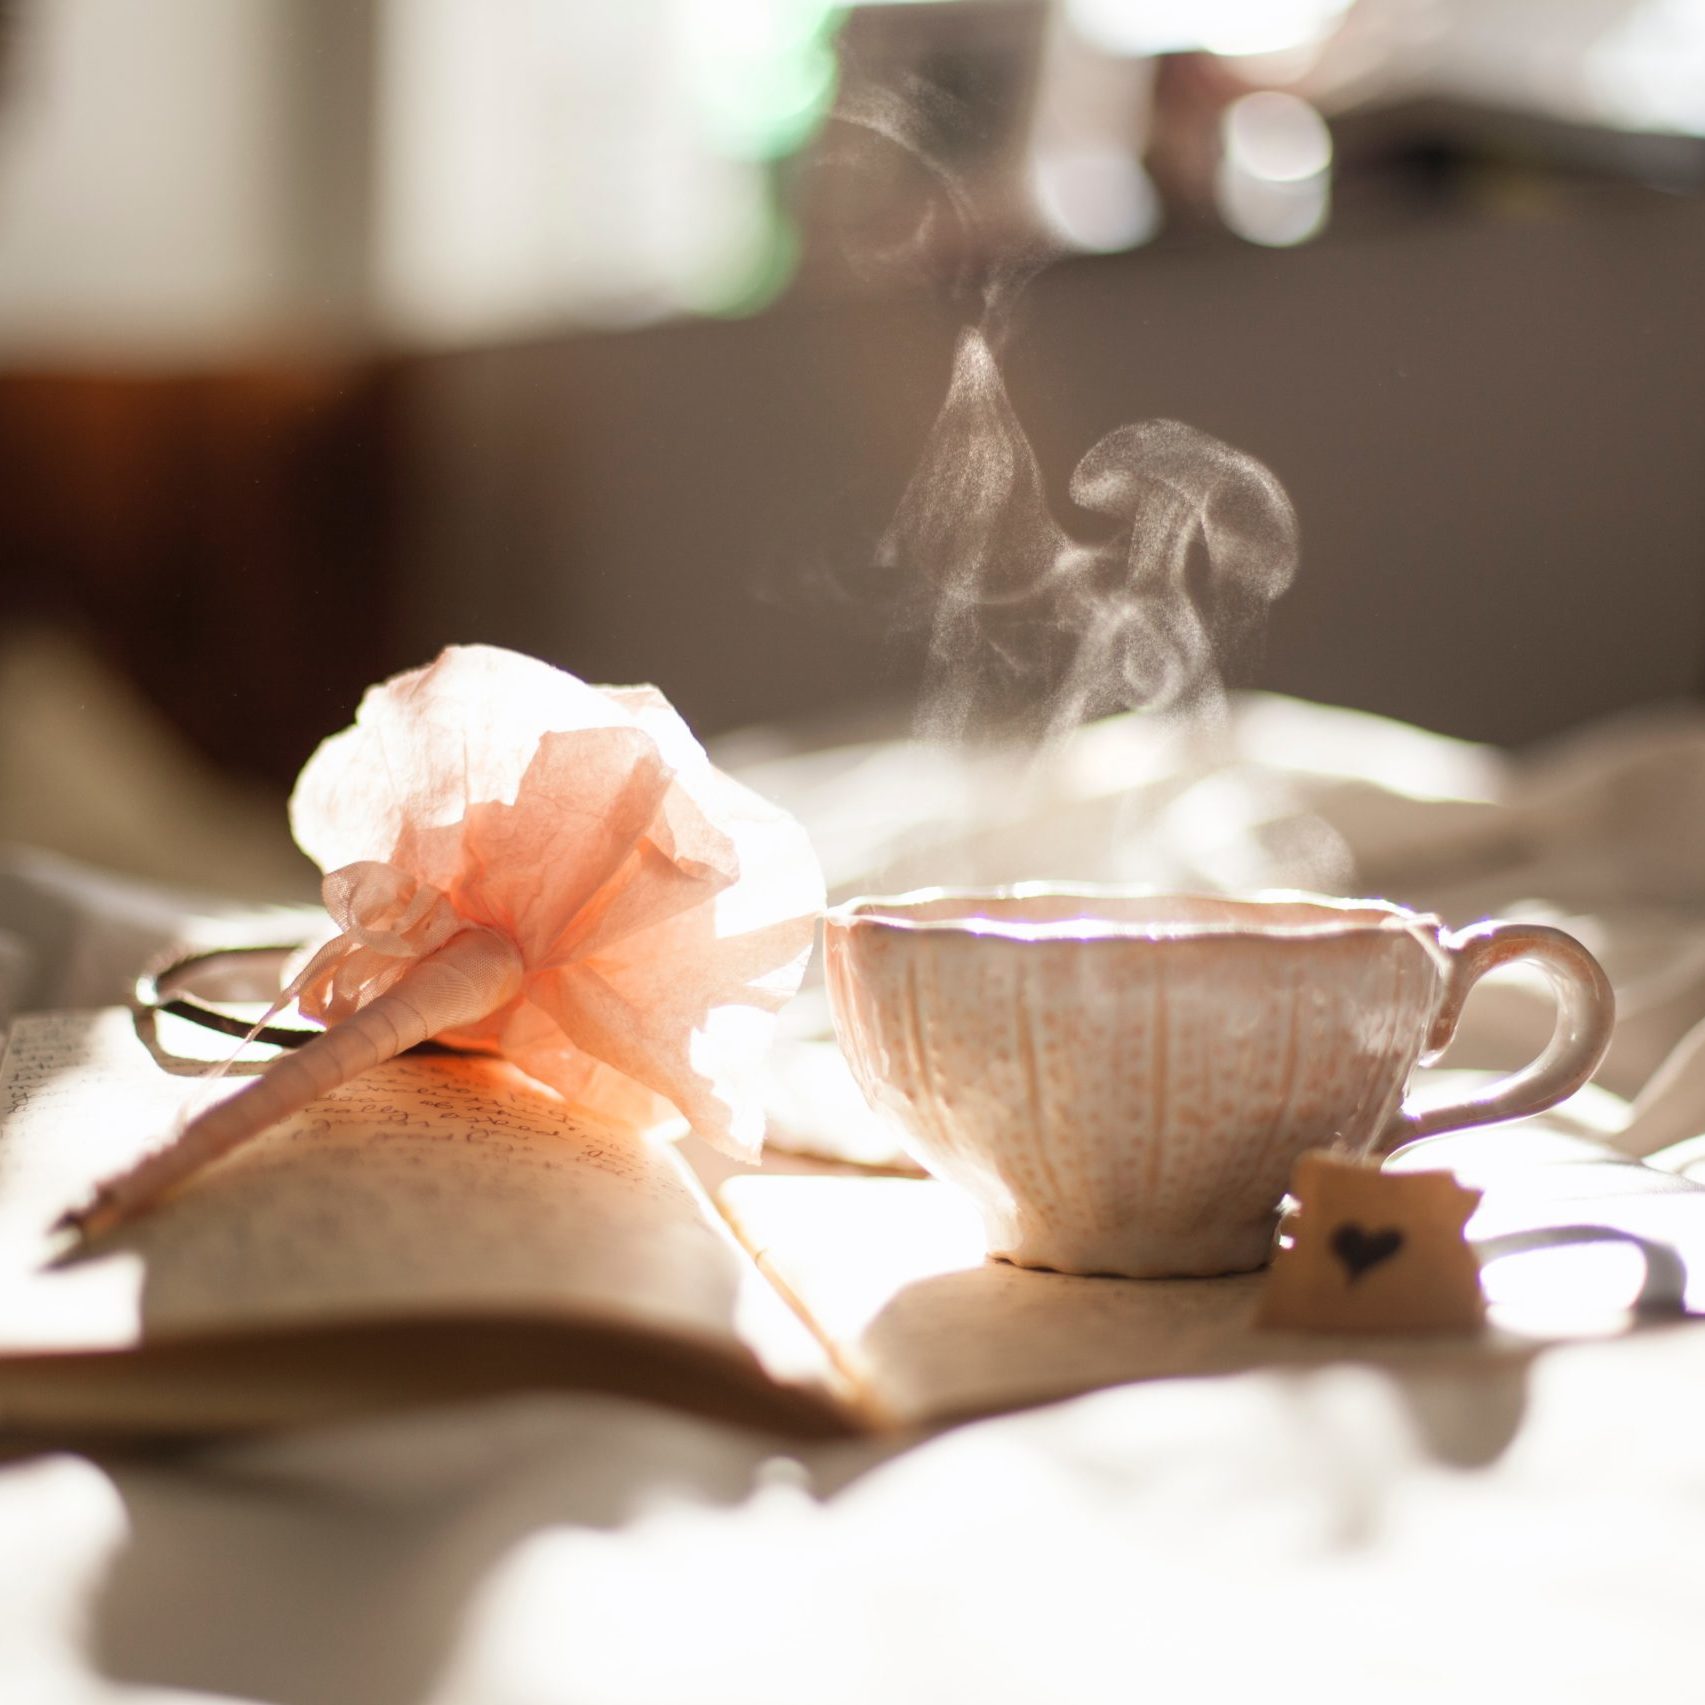 Teacup steaming in morning light on a notebook with written pages and with a pink flower-pen on top.